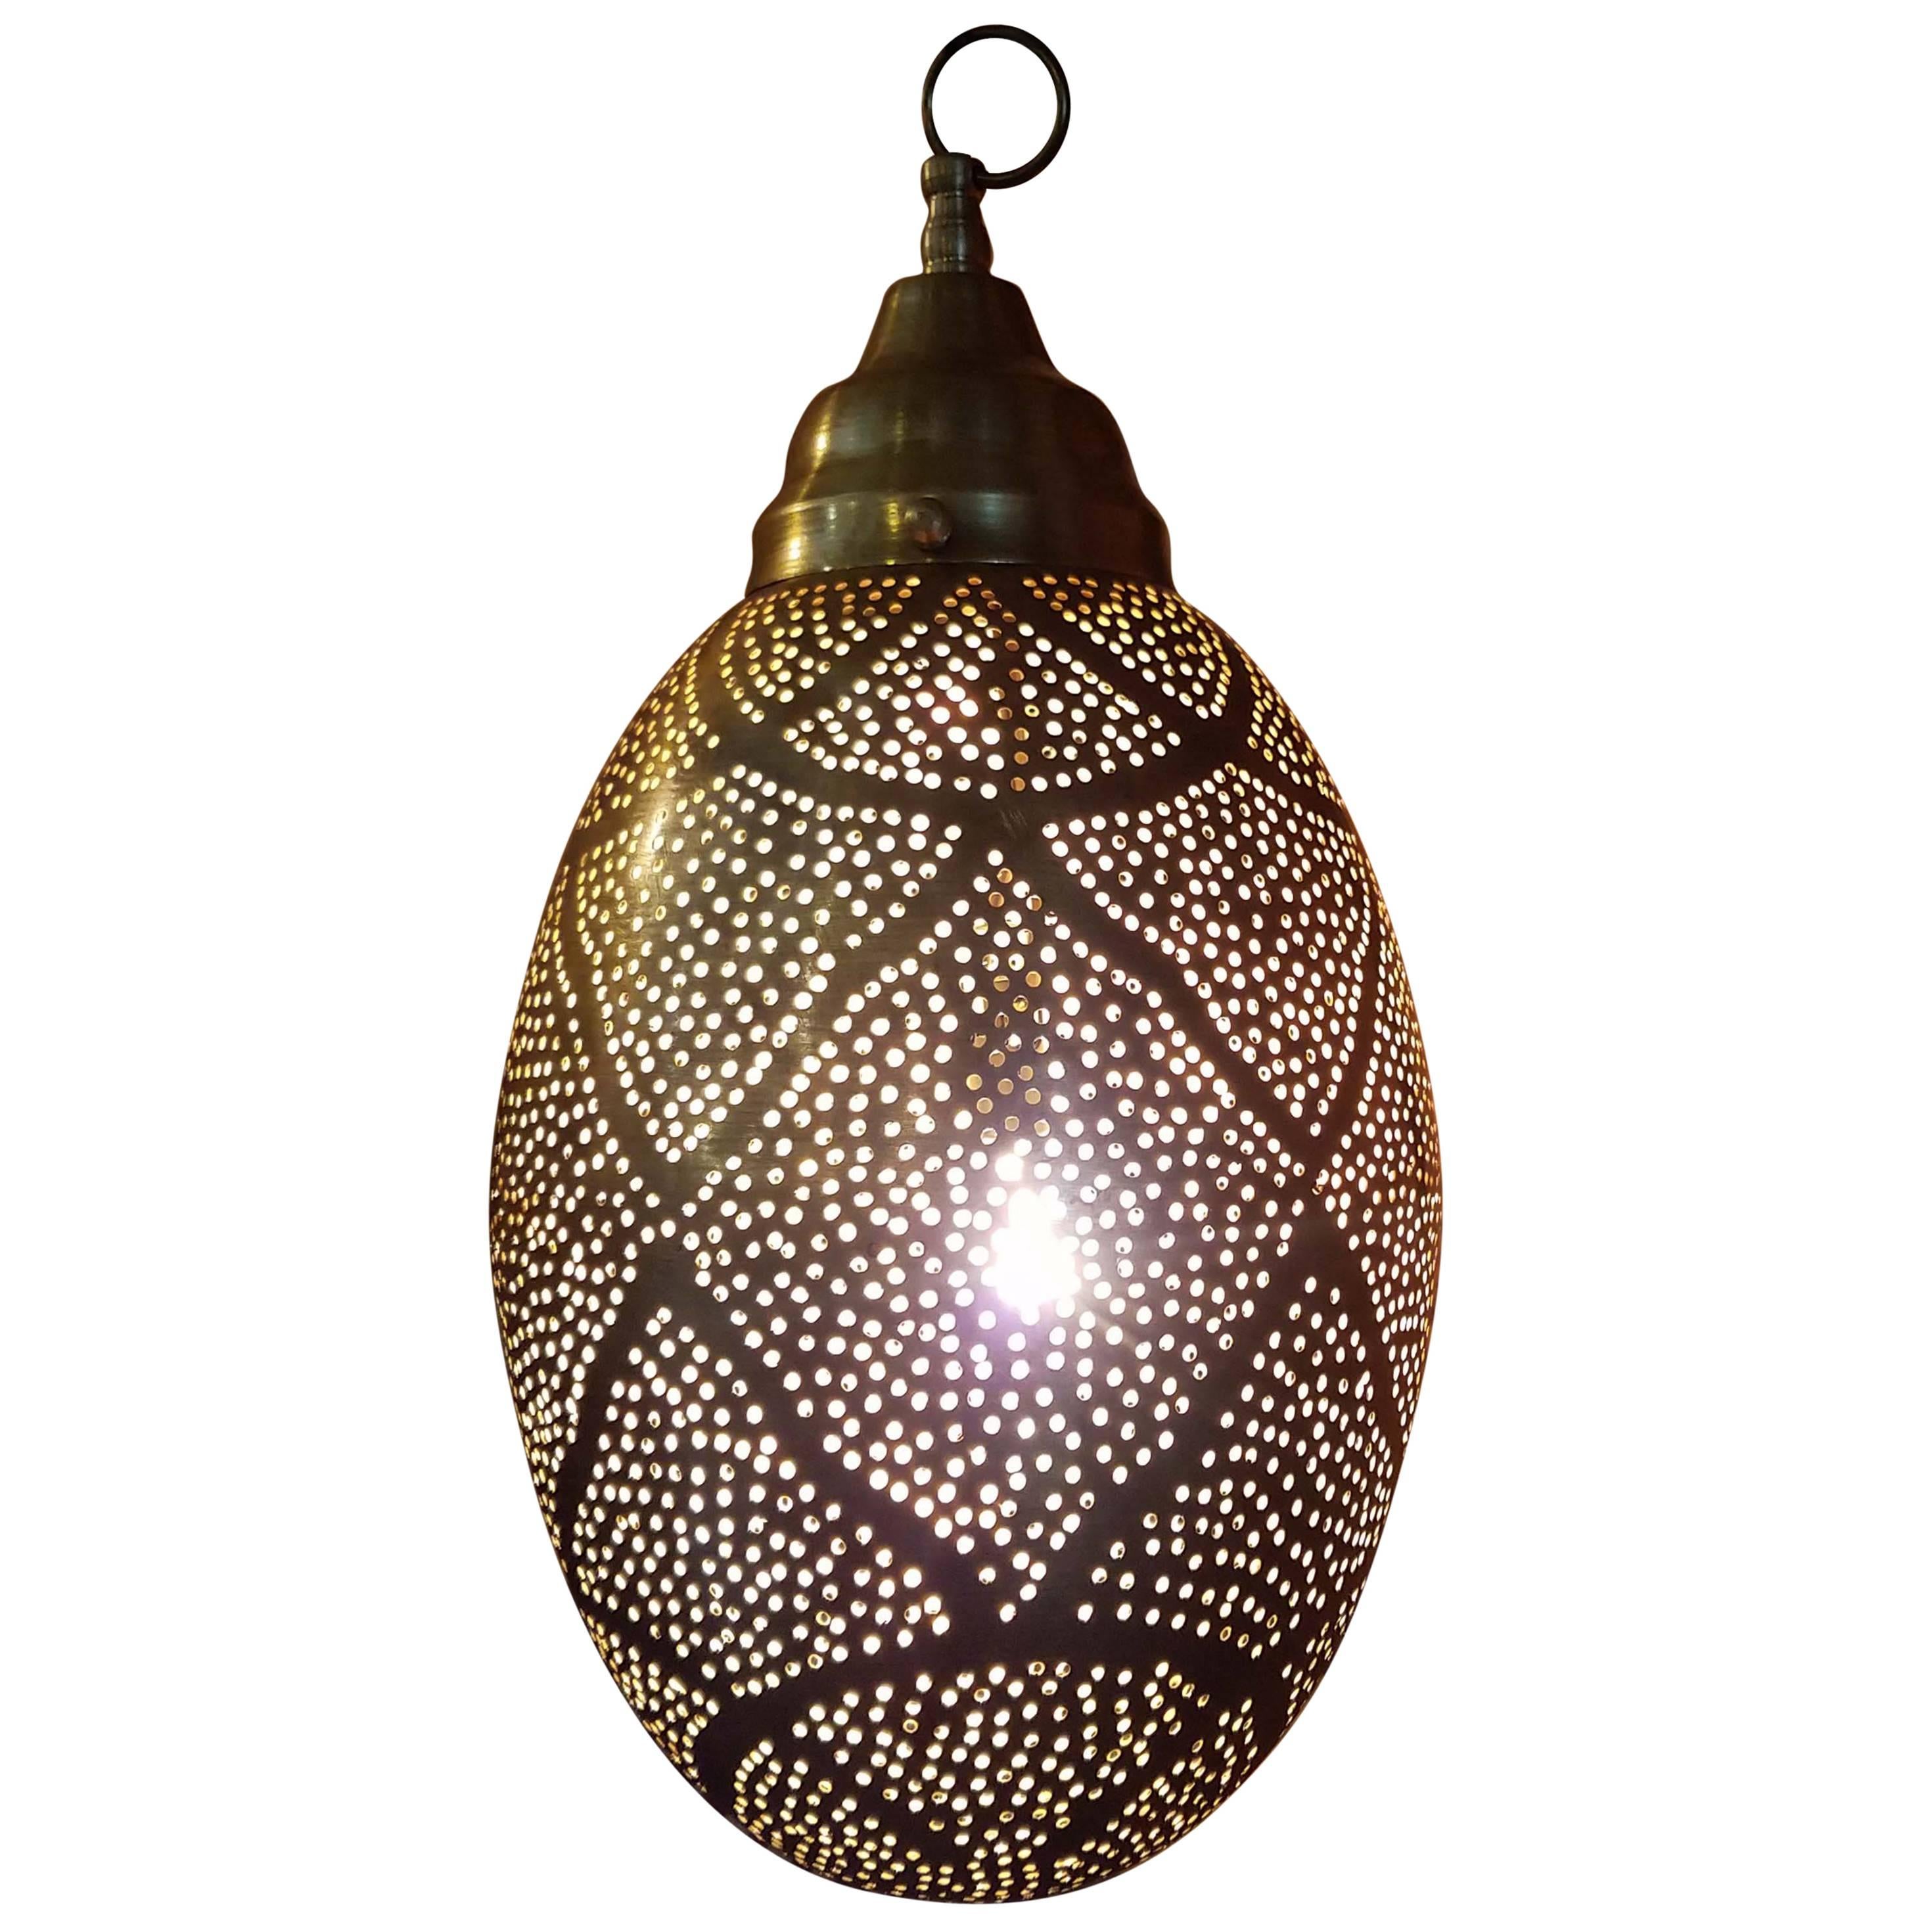 Moroccan Copper Wall / Ceiling Lamp or Lantern, Egg Shape